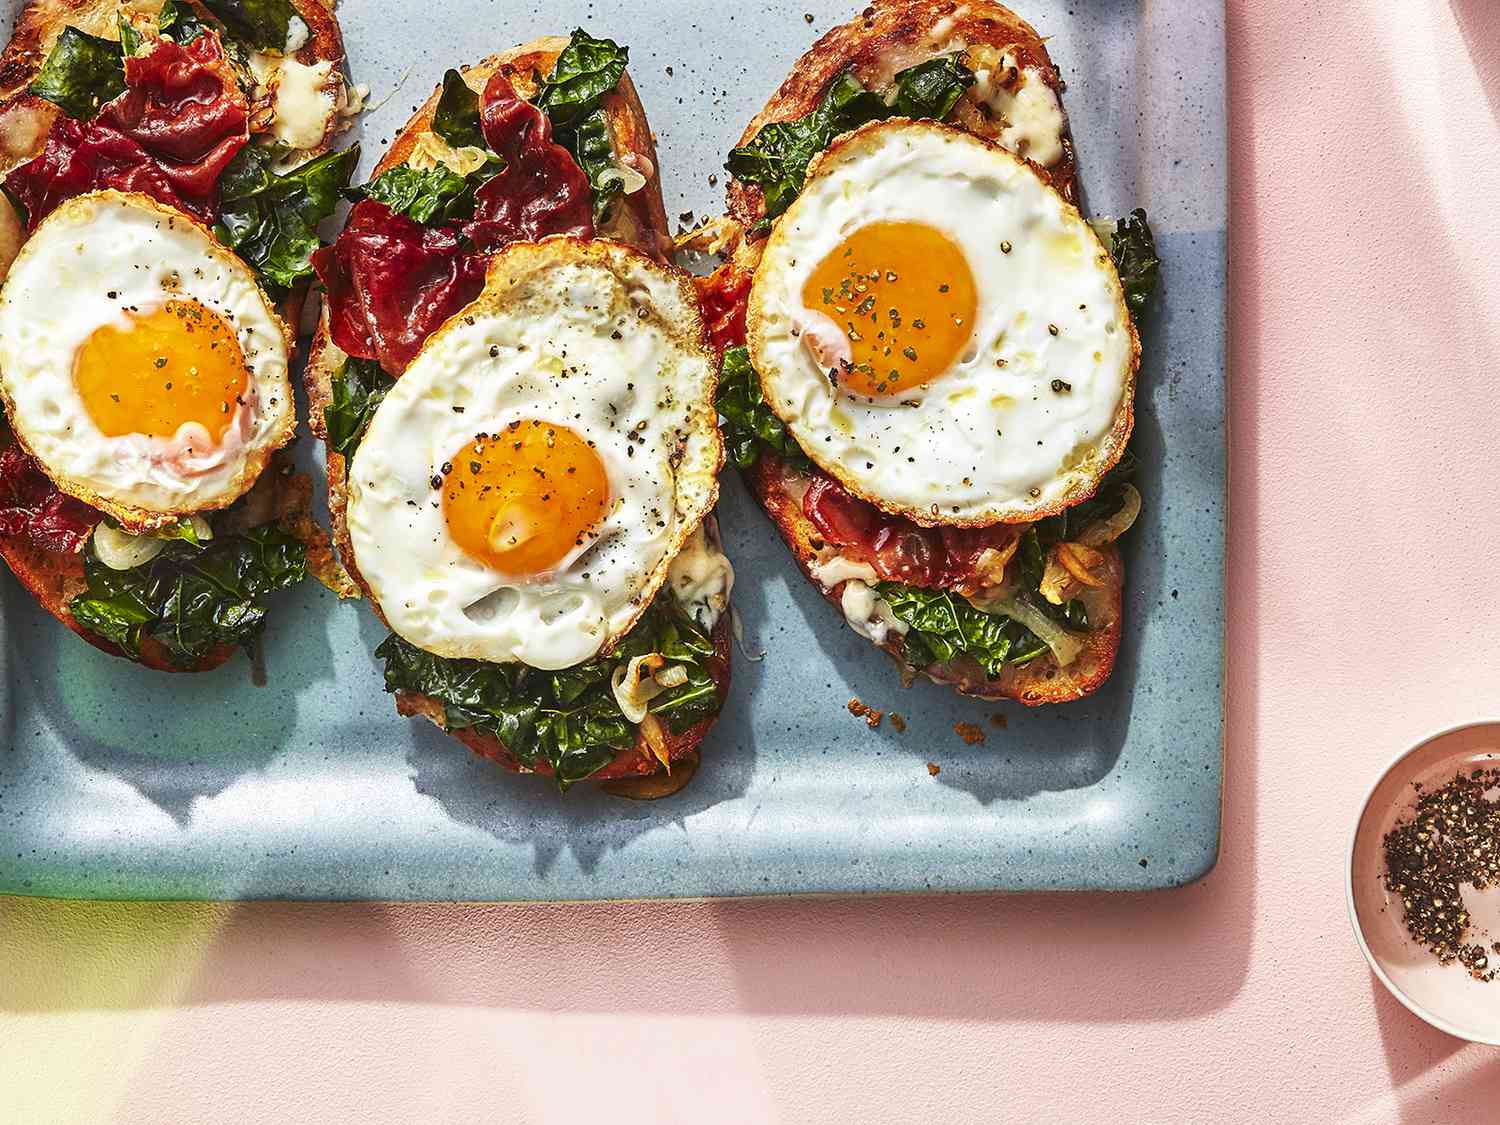 Spring Greens Tartine With Prosciutto, Fontina, and a Fried Egg